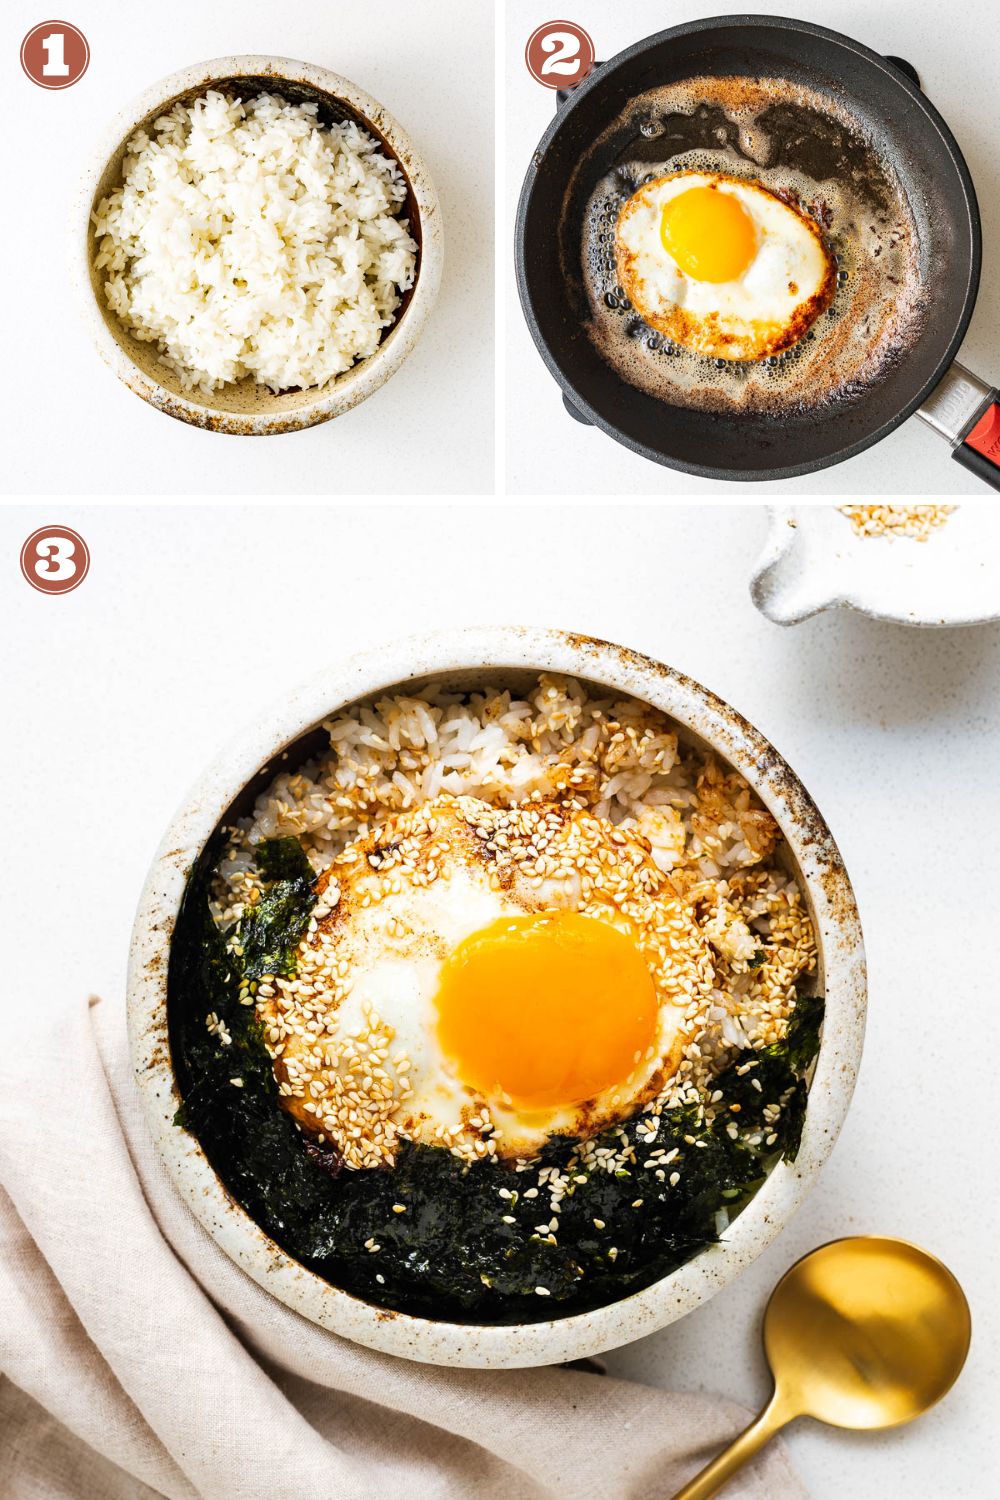 A composite image of how to make gyeran bap in three steps. A bowl of white rice, a fried egg, and a ceramic bowl with egg, rice, seaweed and sesame seeds.